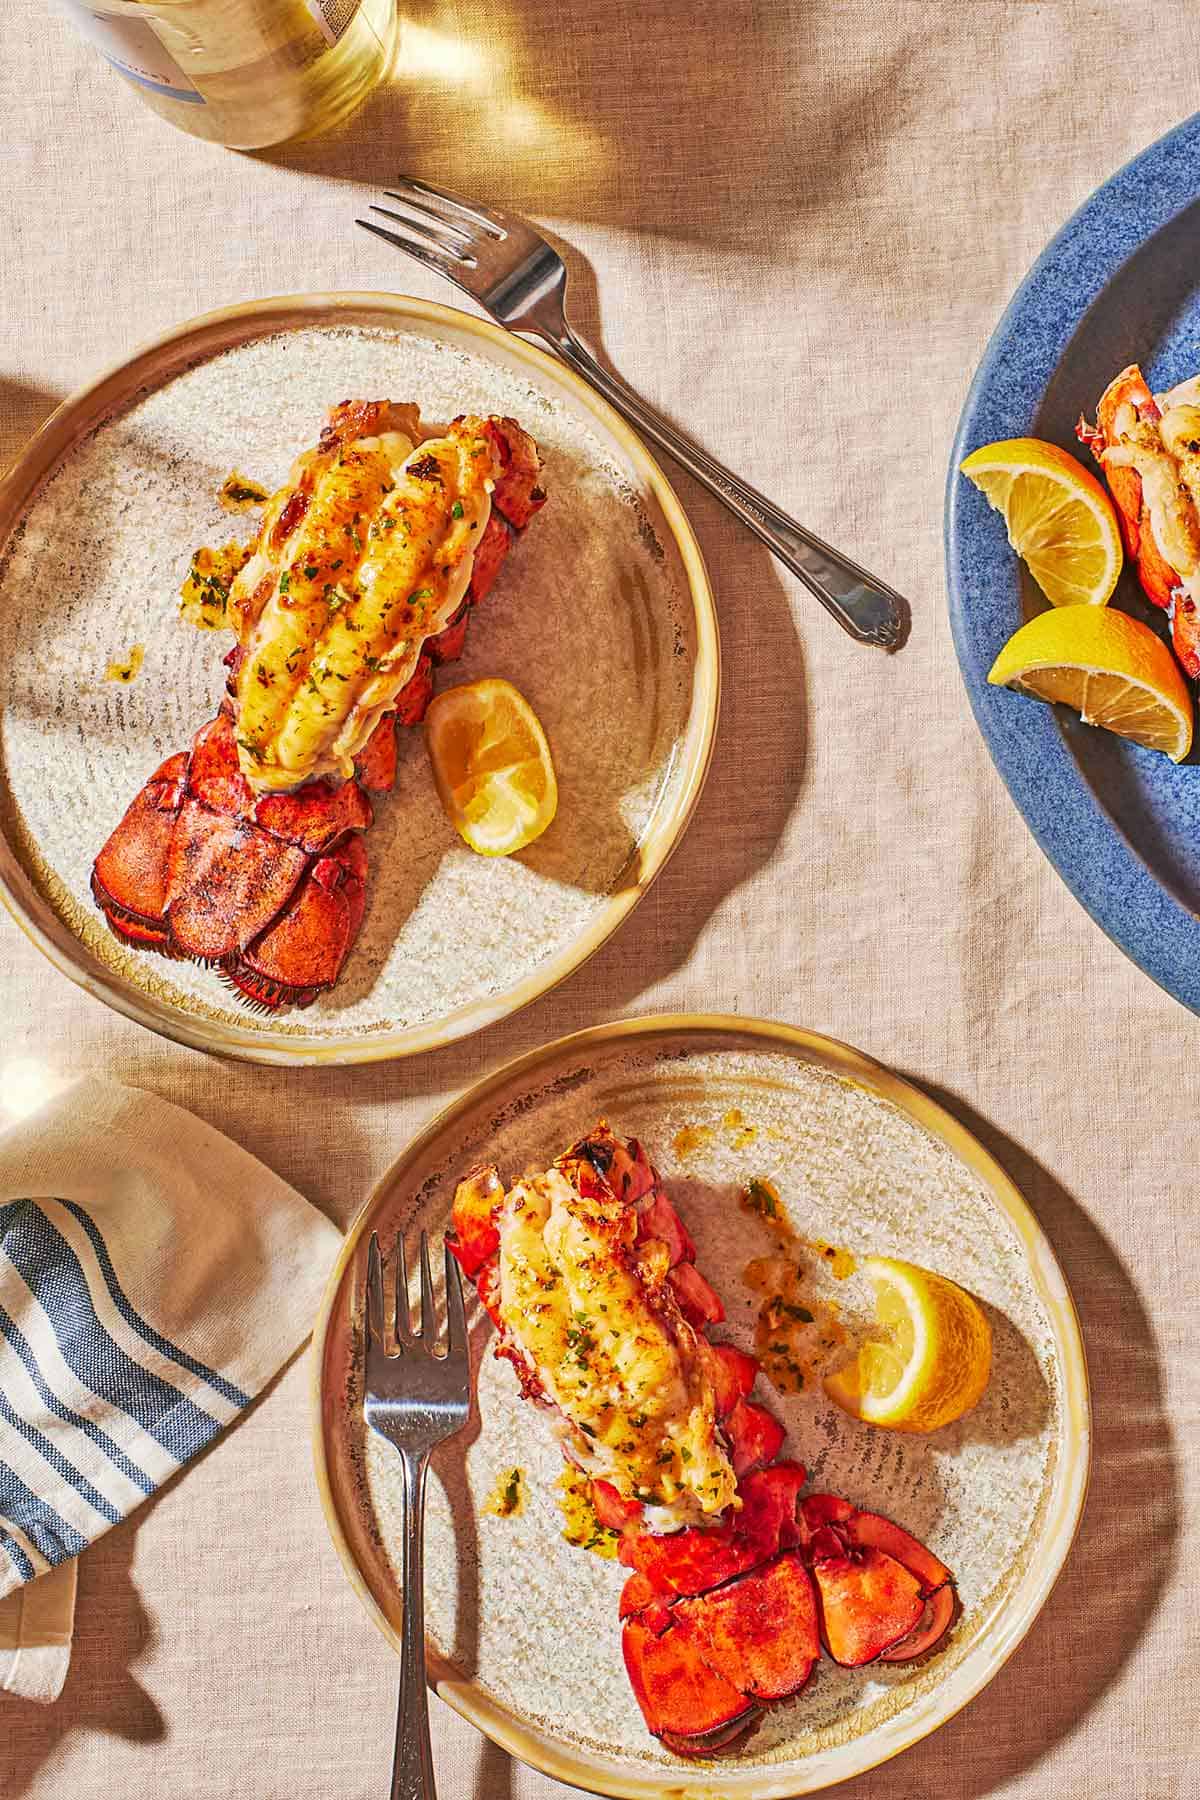 two plates with forks, each containing a broiled lobster tail and a lemon wedge.